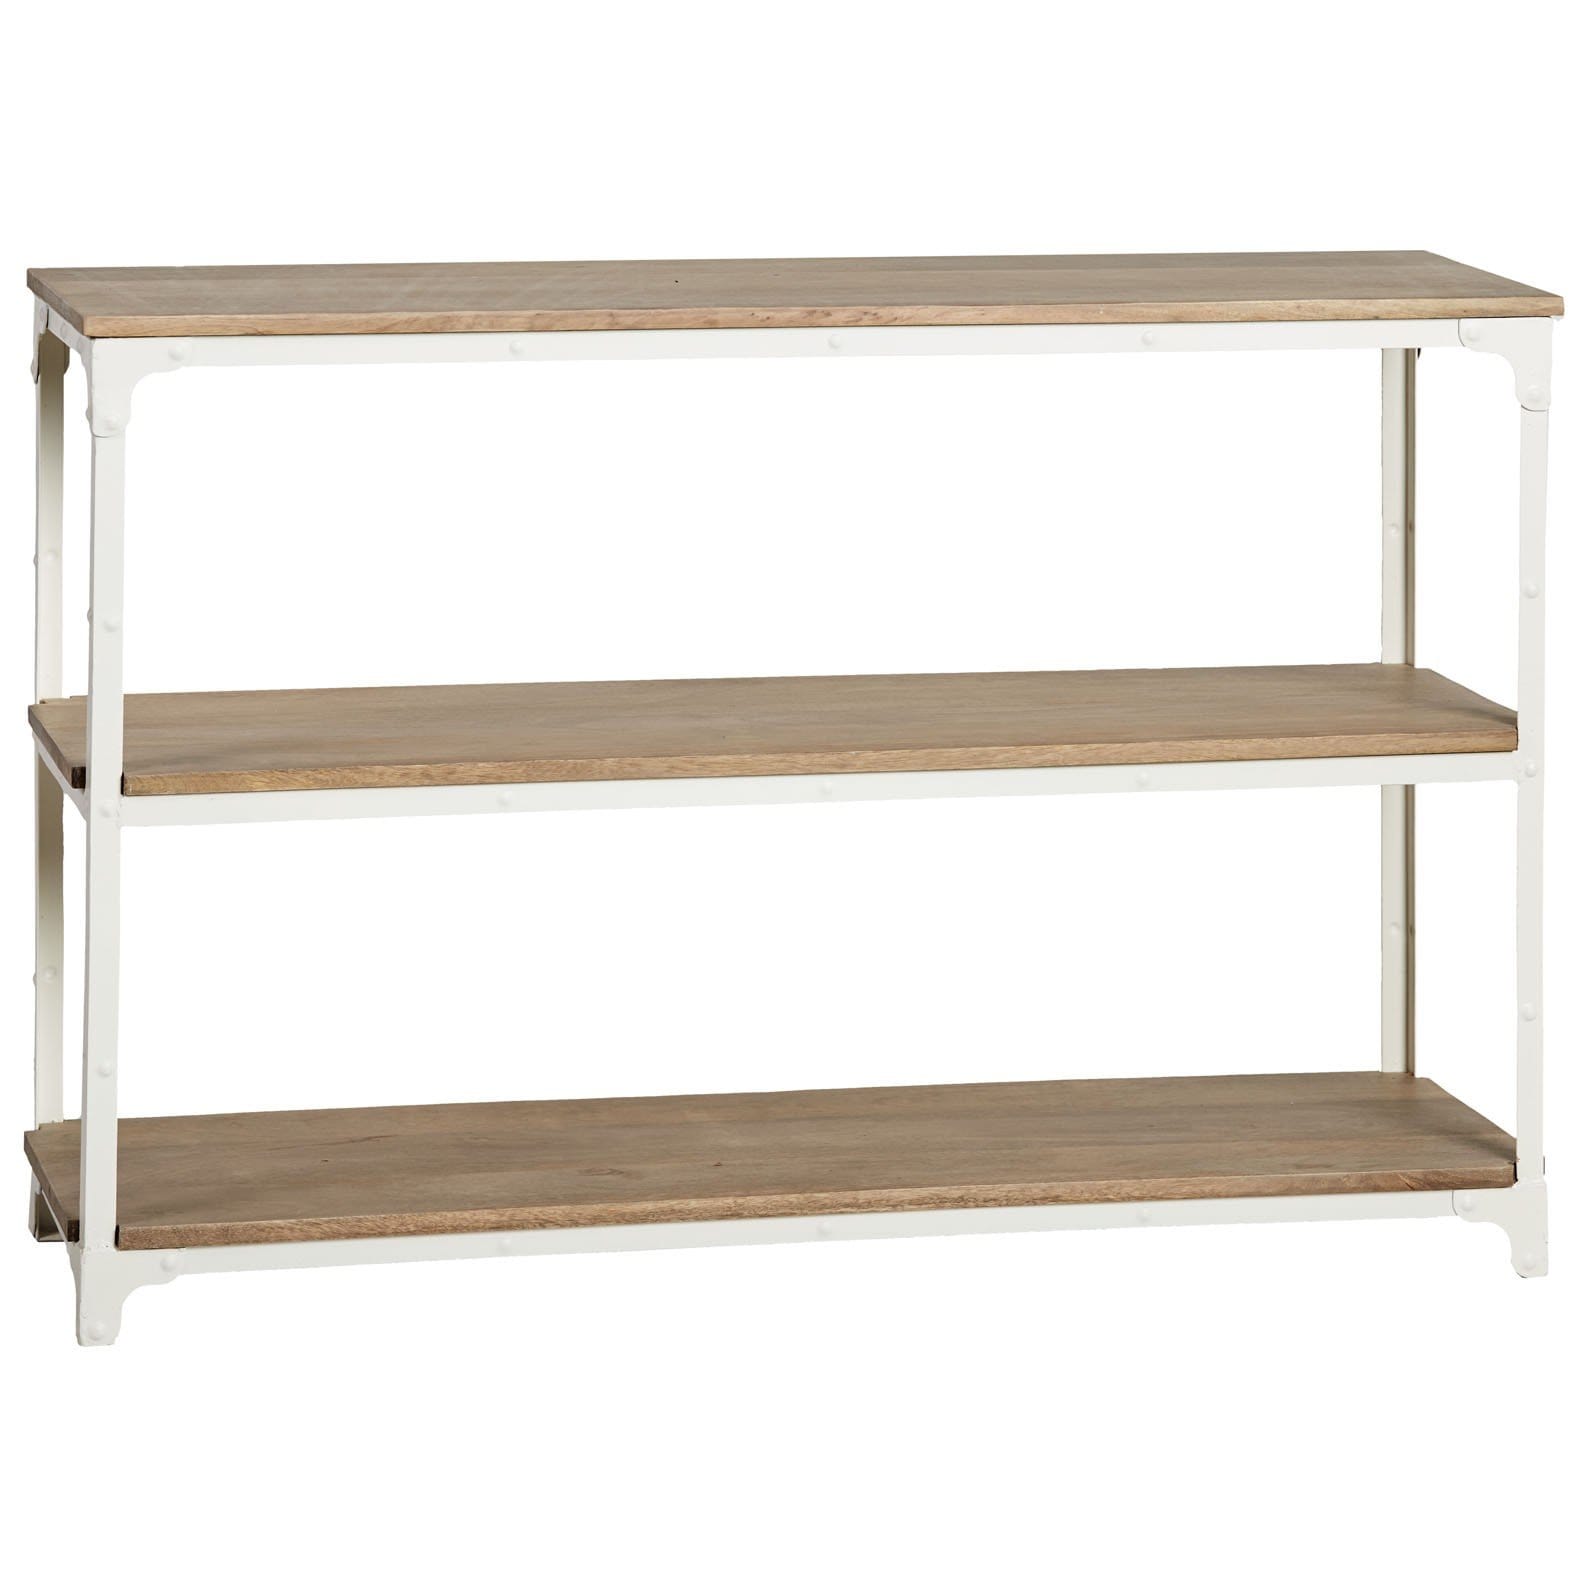 Buy Scout Console Table online at - Sofas Direct